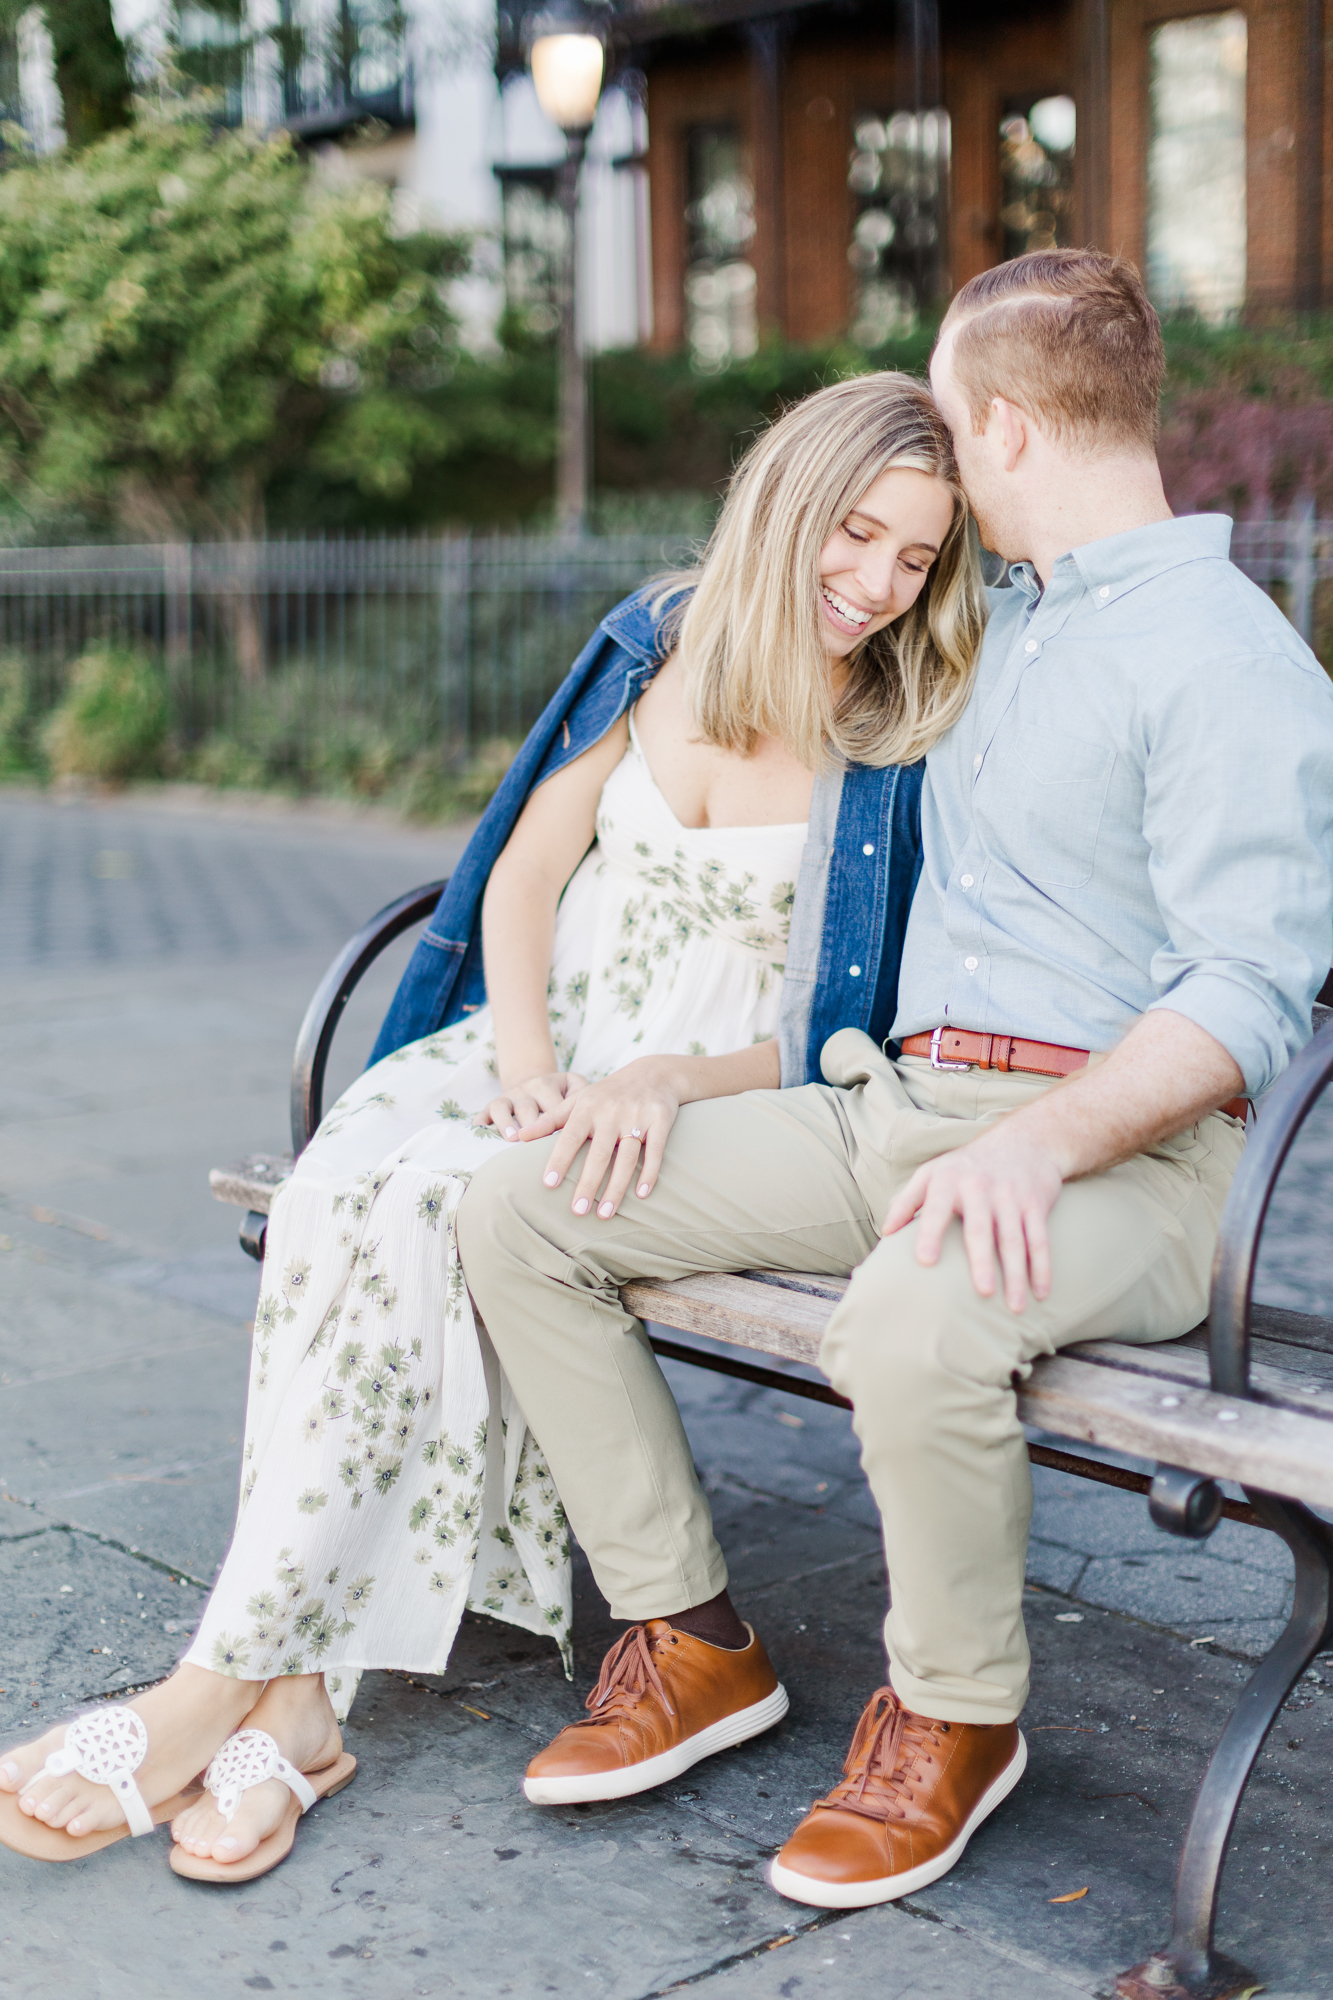 Awesome Pose Ideas for your Engagement Session